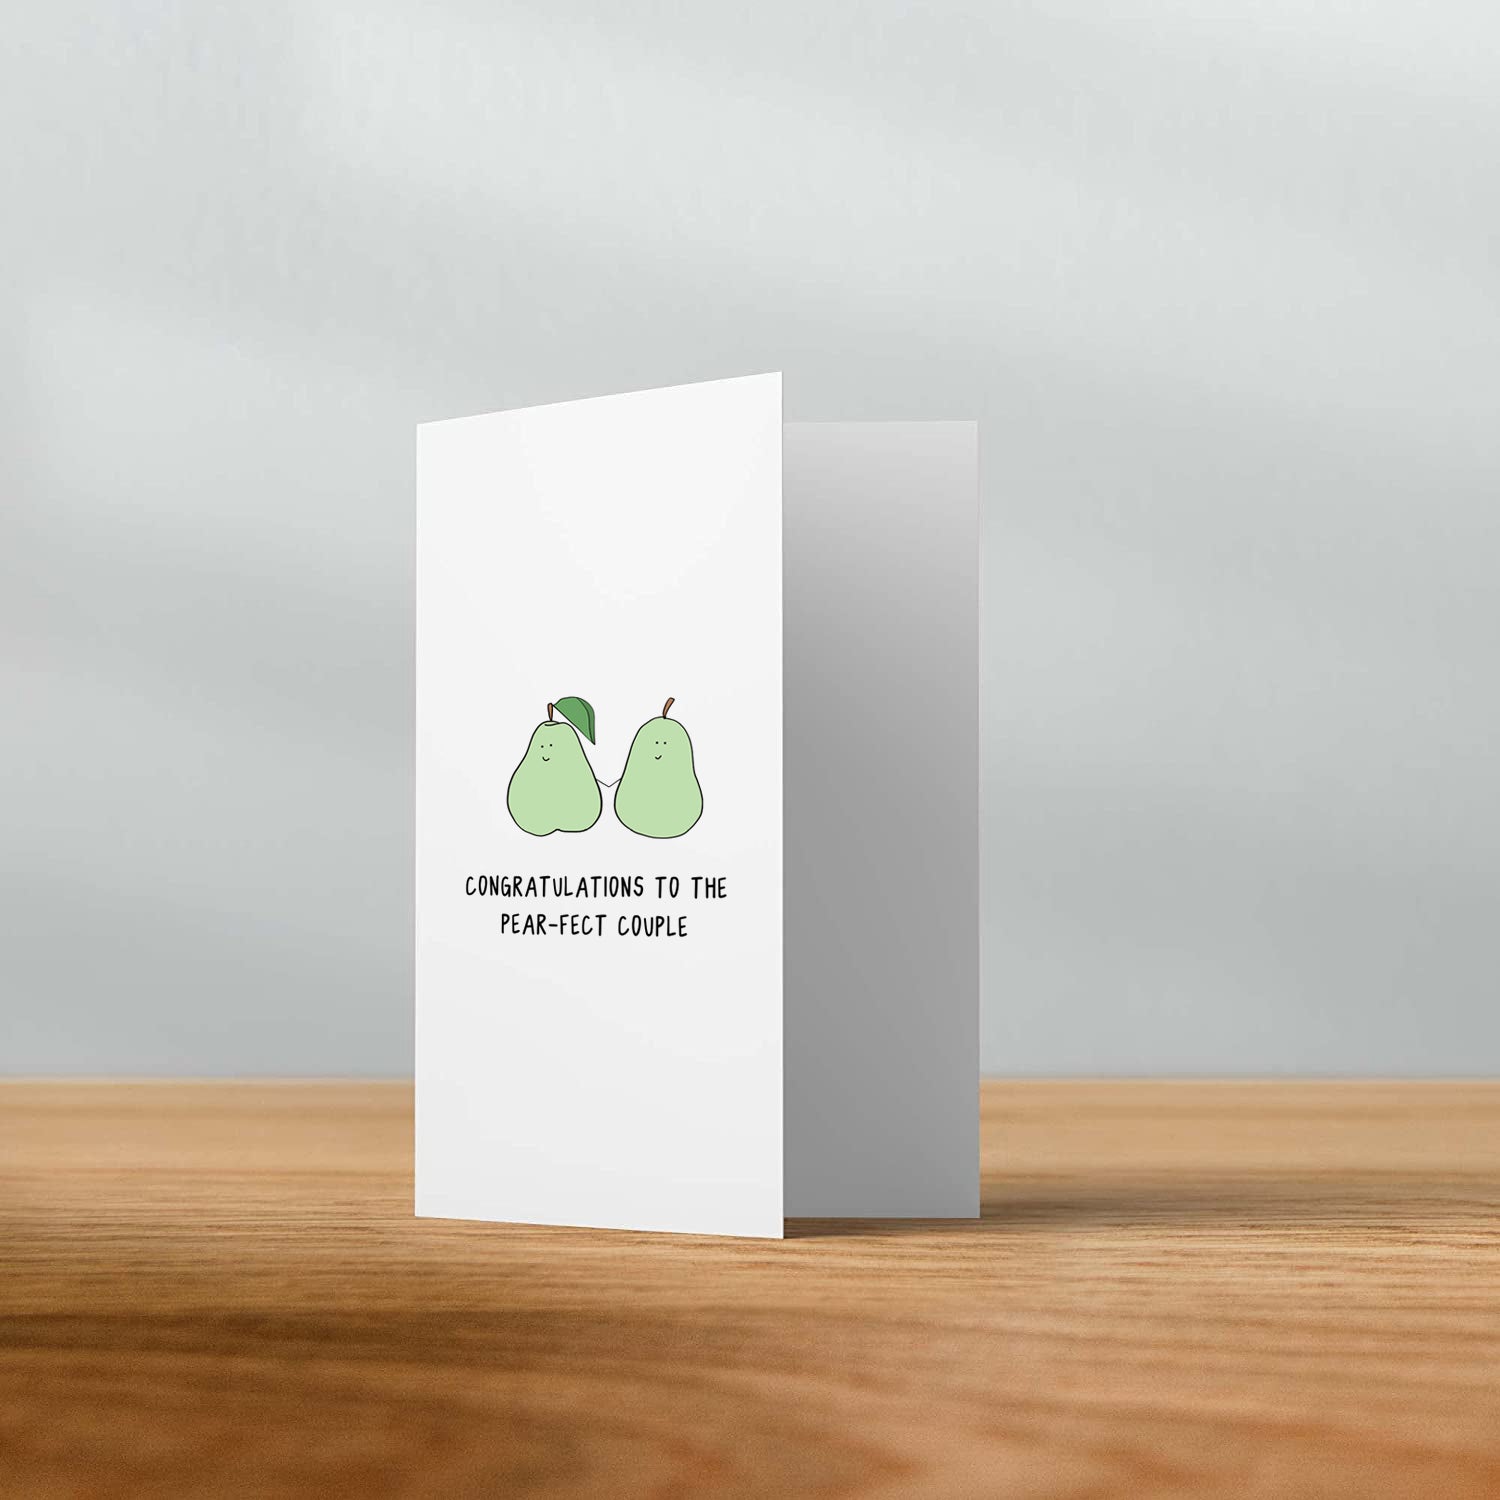 A rockdoodles Pear-Fect Couple Card to congratulate them.